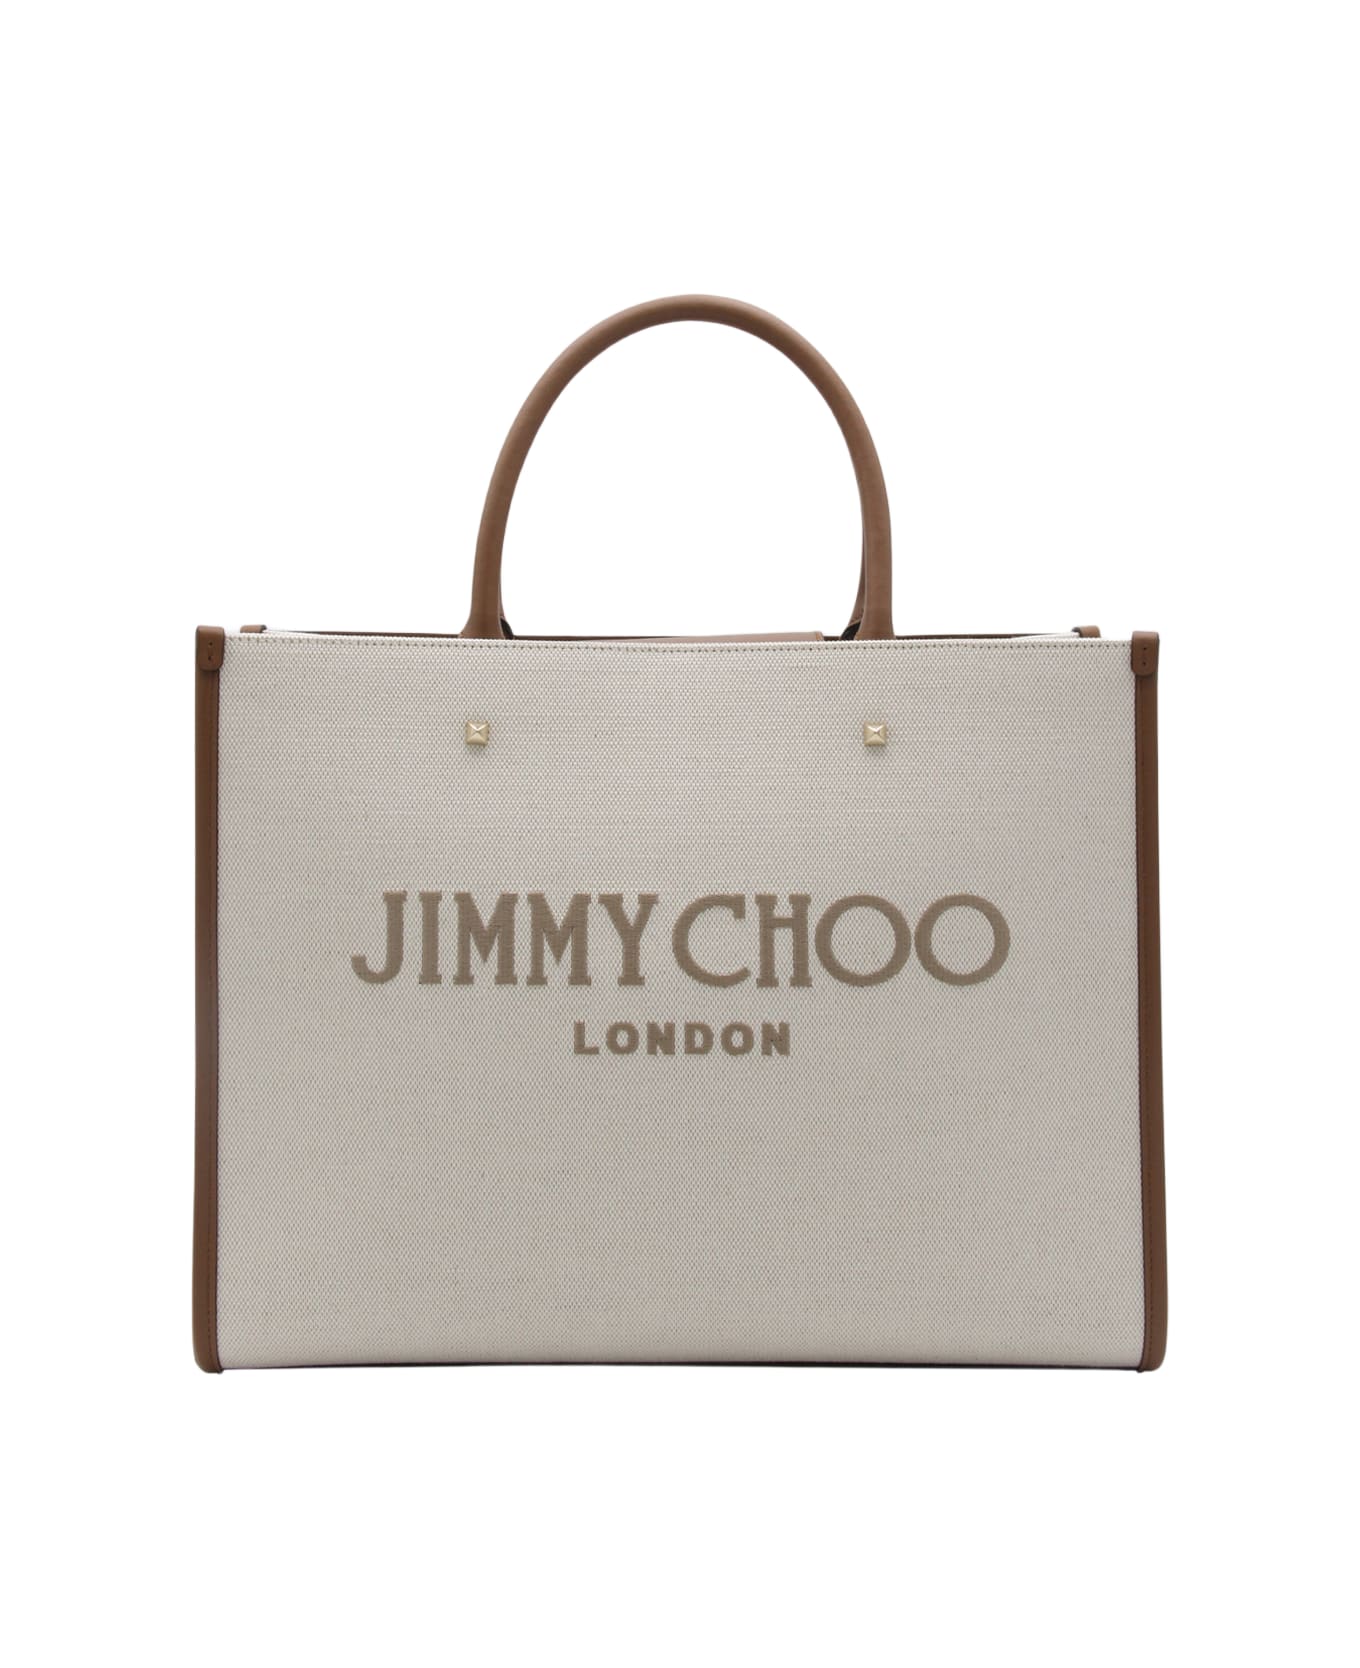 Jimmy Choo Natural And Taupe Canvas Avenue Medium Tote Bag - Naturaltaupe drak tan light トートバッグ